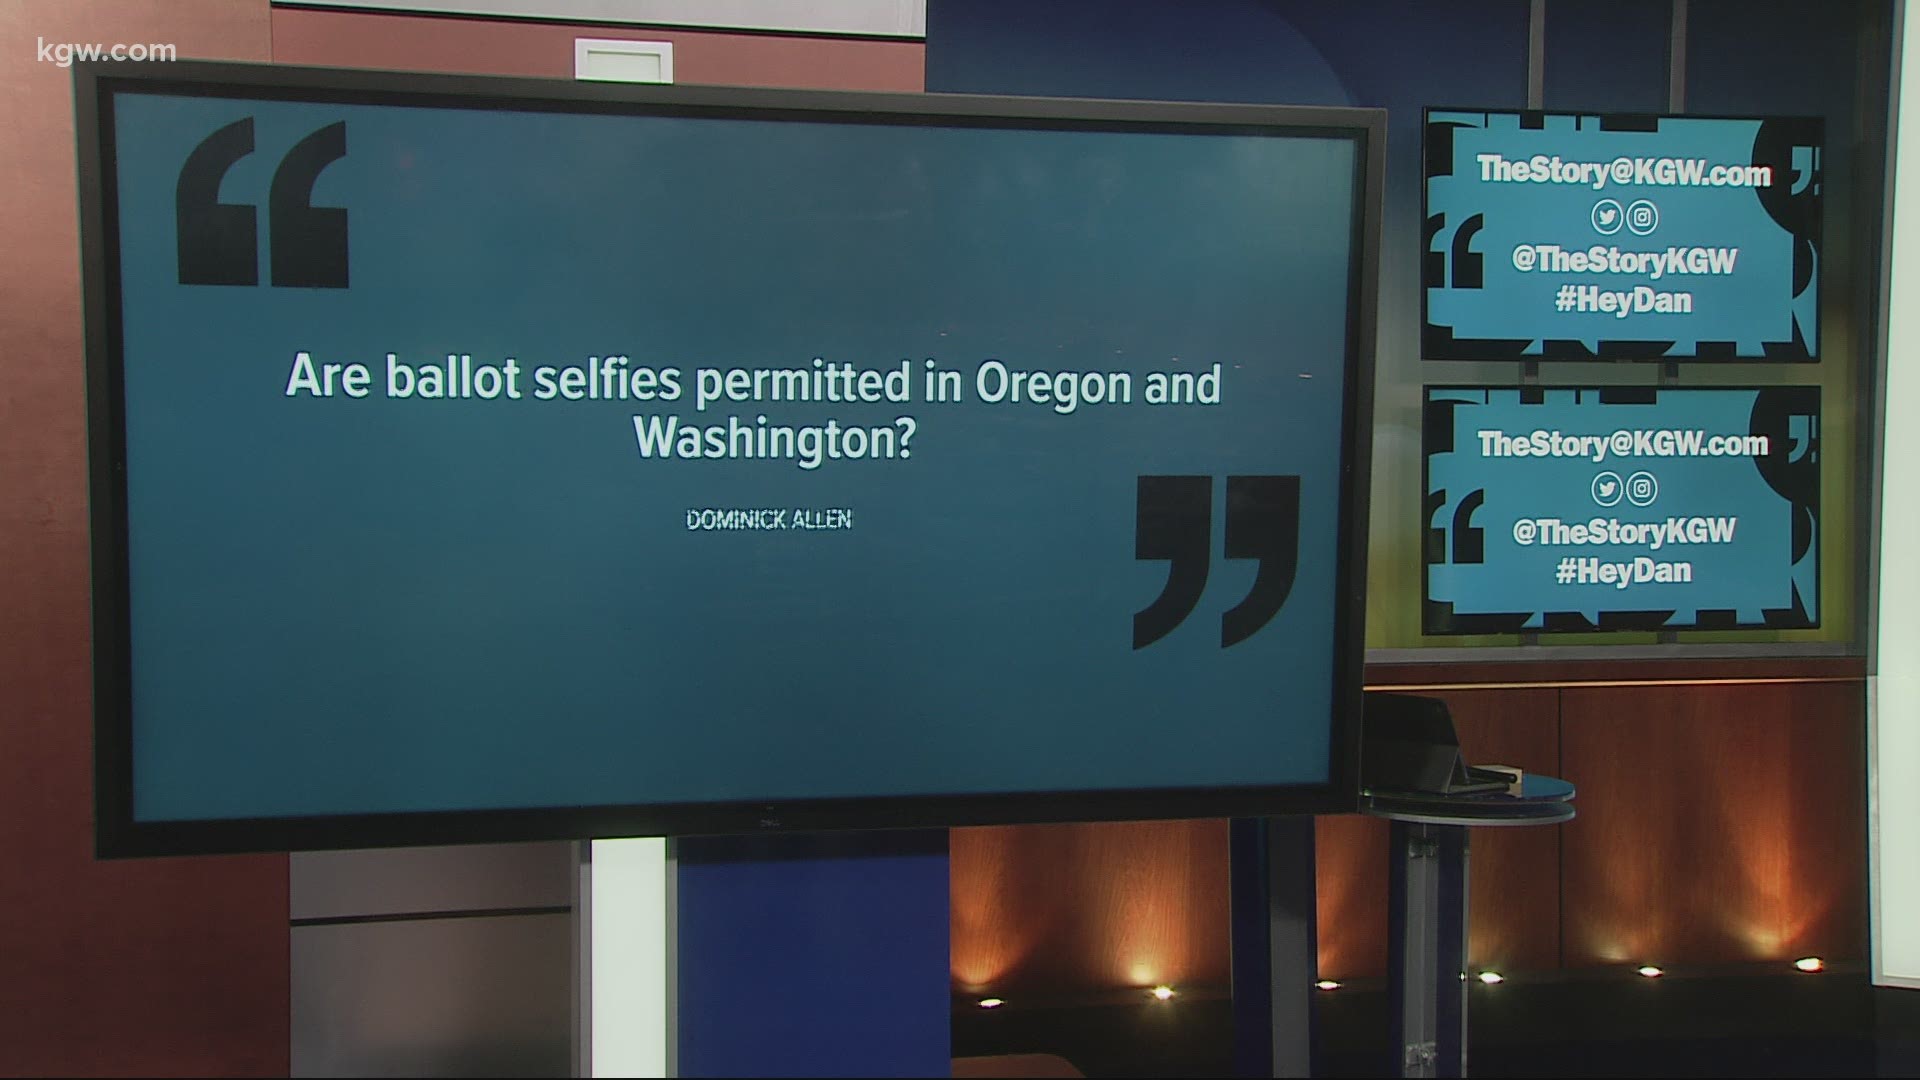 In some states, you're breaking the law if you take a picture of your ballot. So what are the rules in Washington or Oregon?